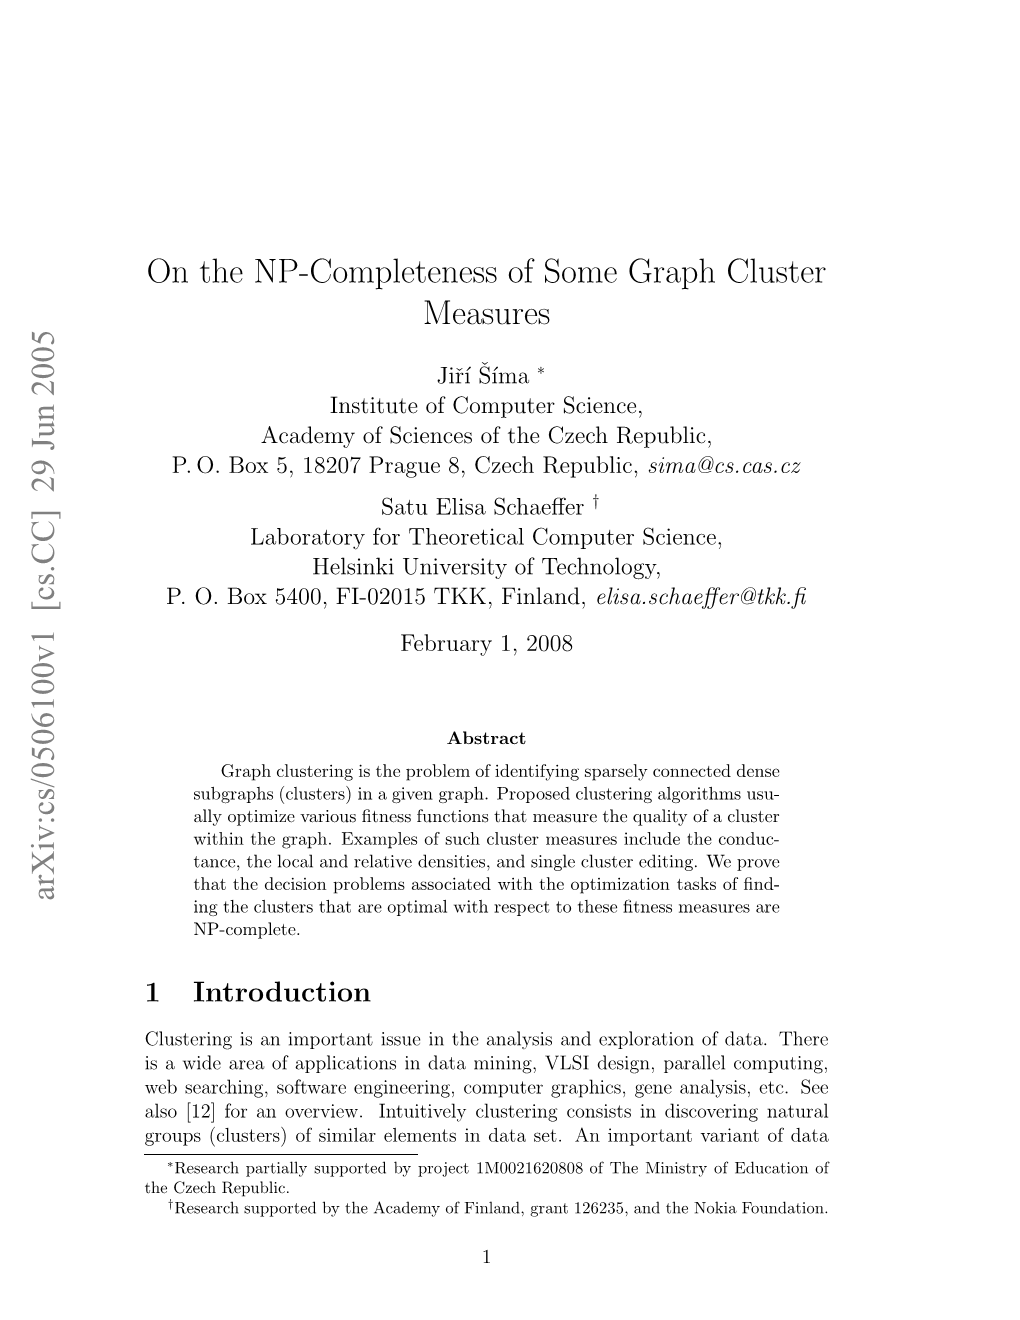 On the NP-Completeness of Some Graph Cluster Measures